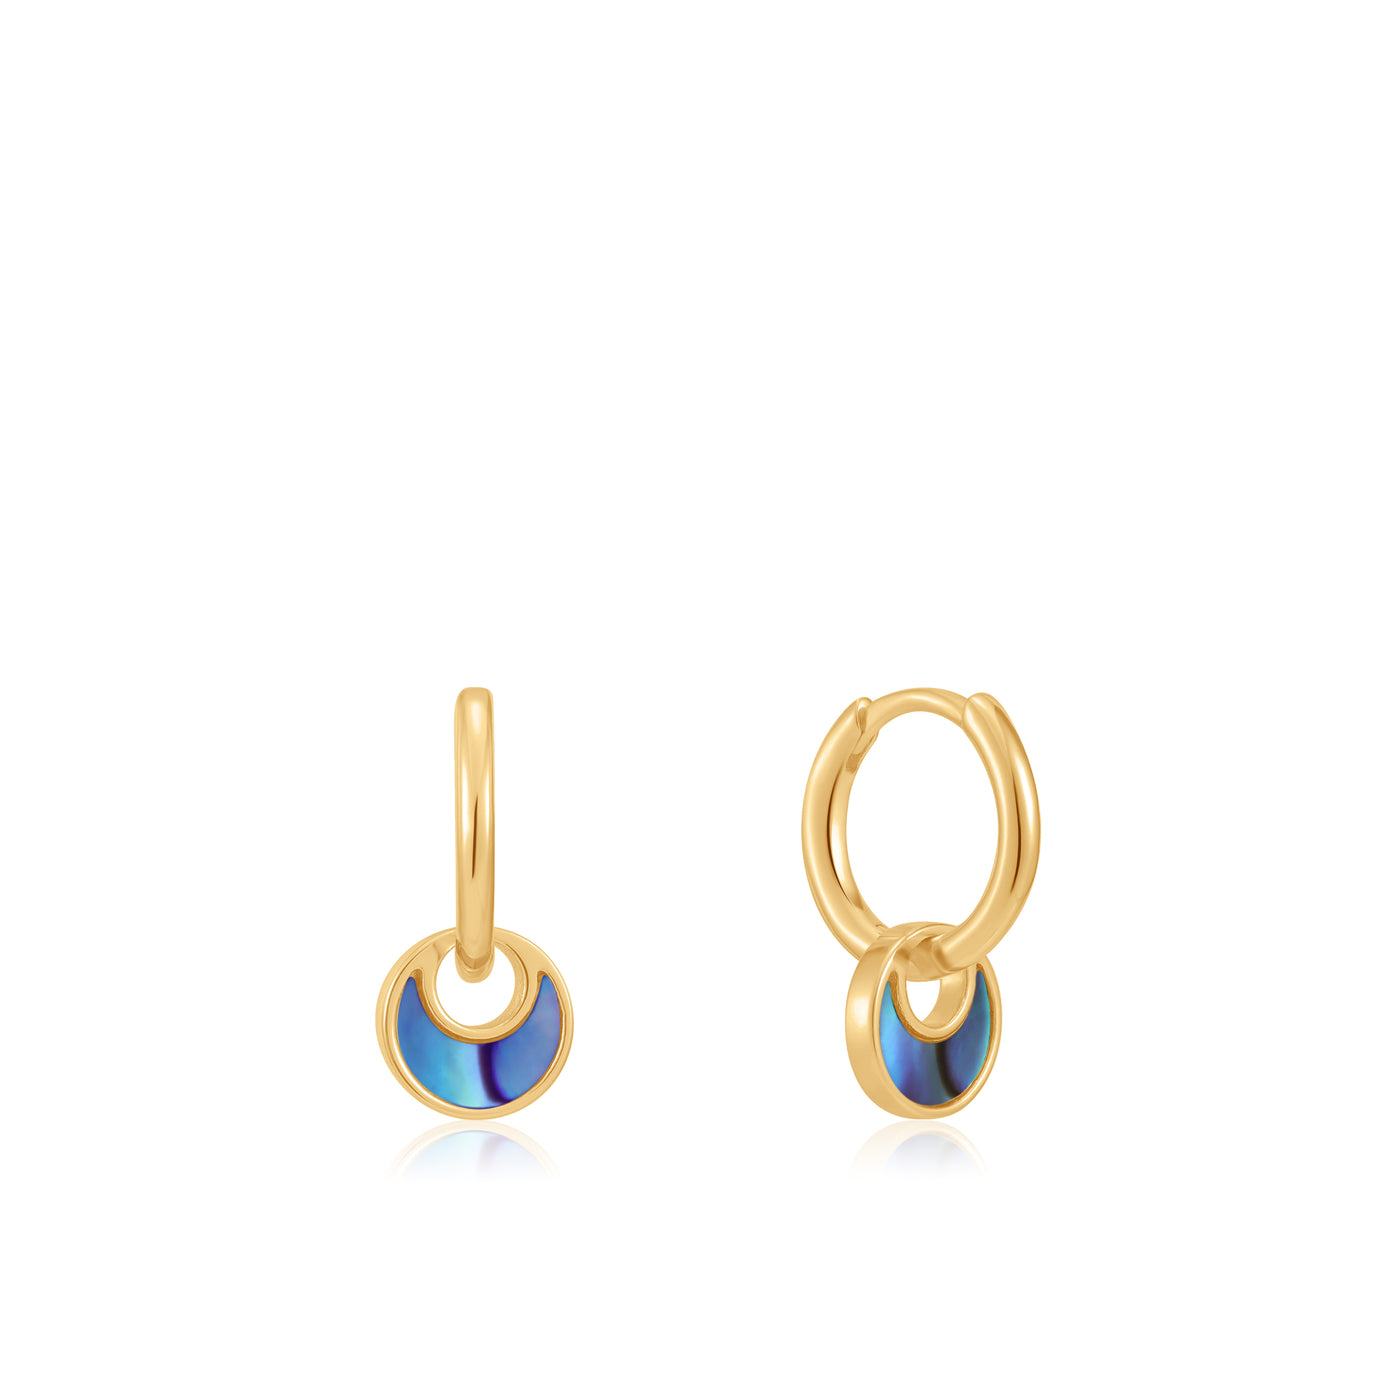 Ania Haie Gold Plated Silver Hoops E027-06G